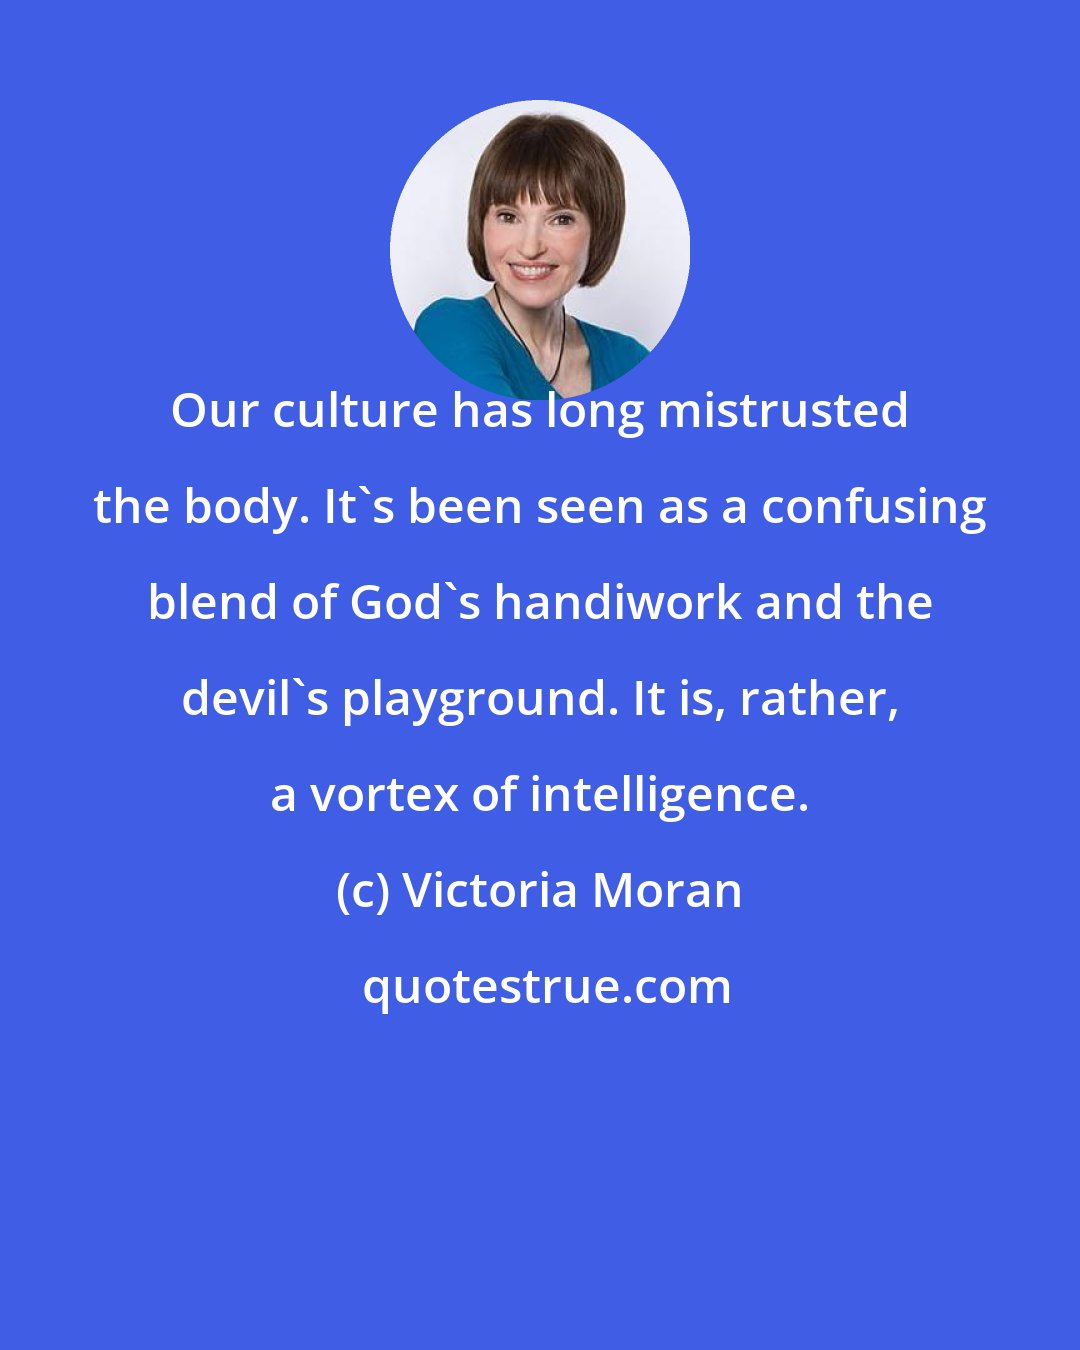 Victoria Moran: Our culture has long mistrusted the body. It's been seen as a confusing blend of God's handiwork and the devil's playground. It is, rather, a vortex of intelligence.